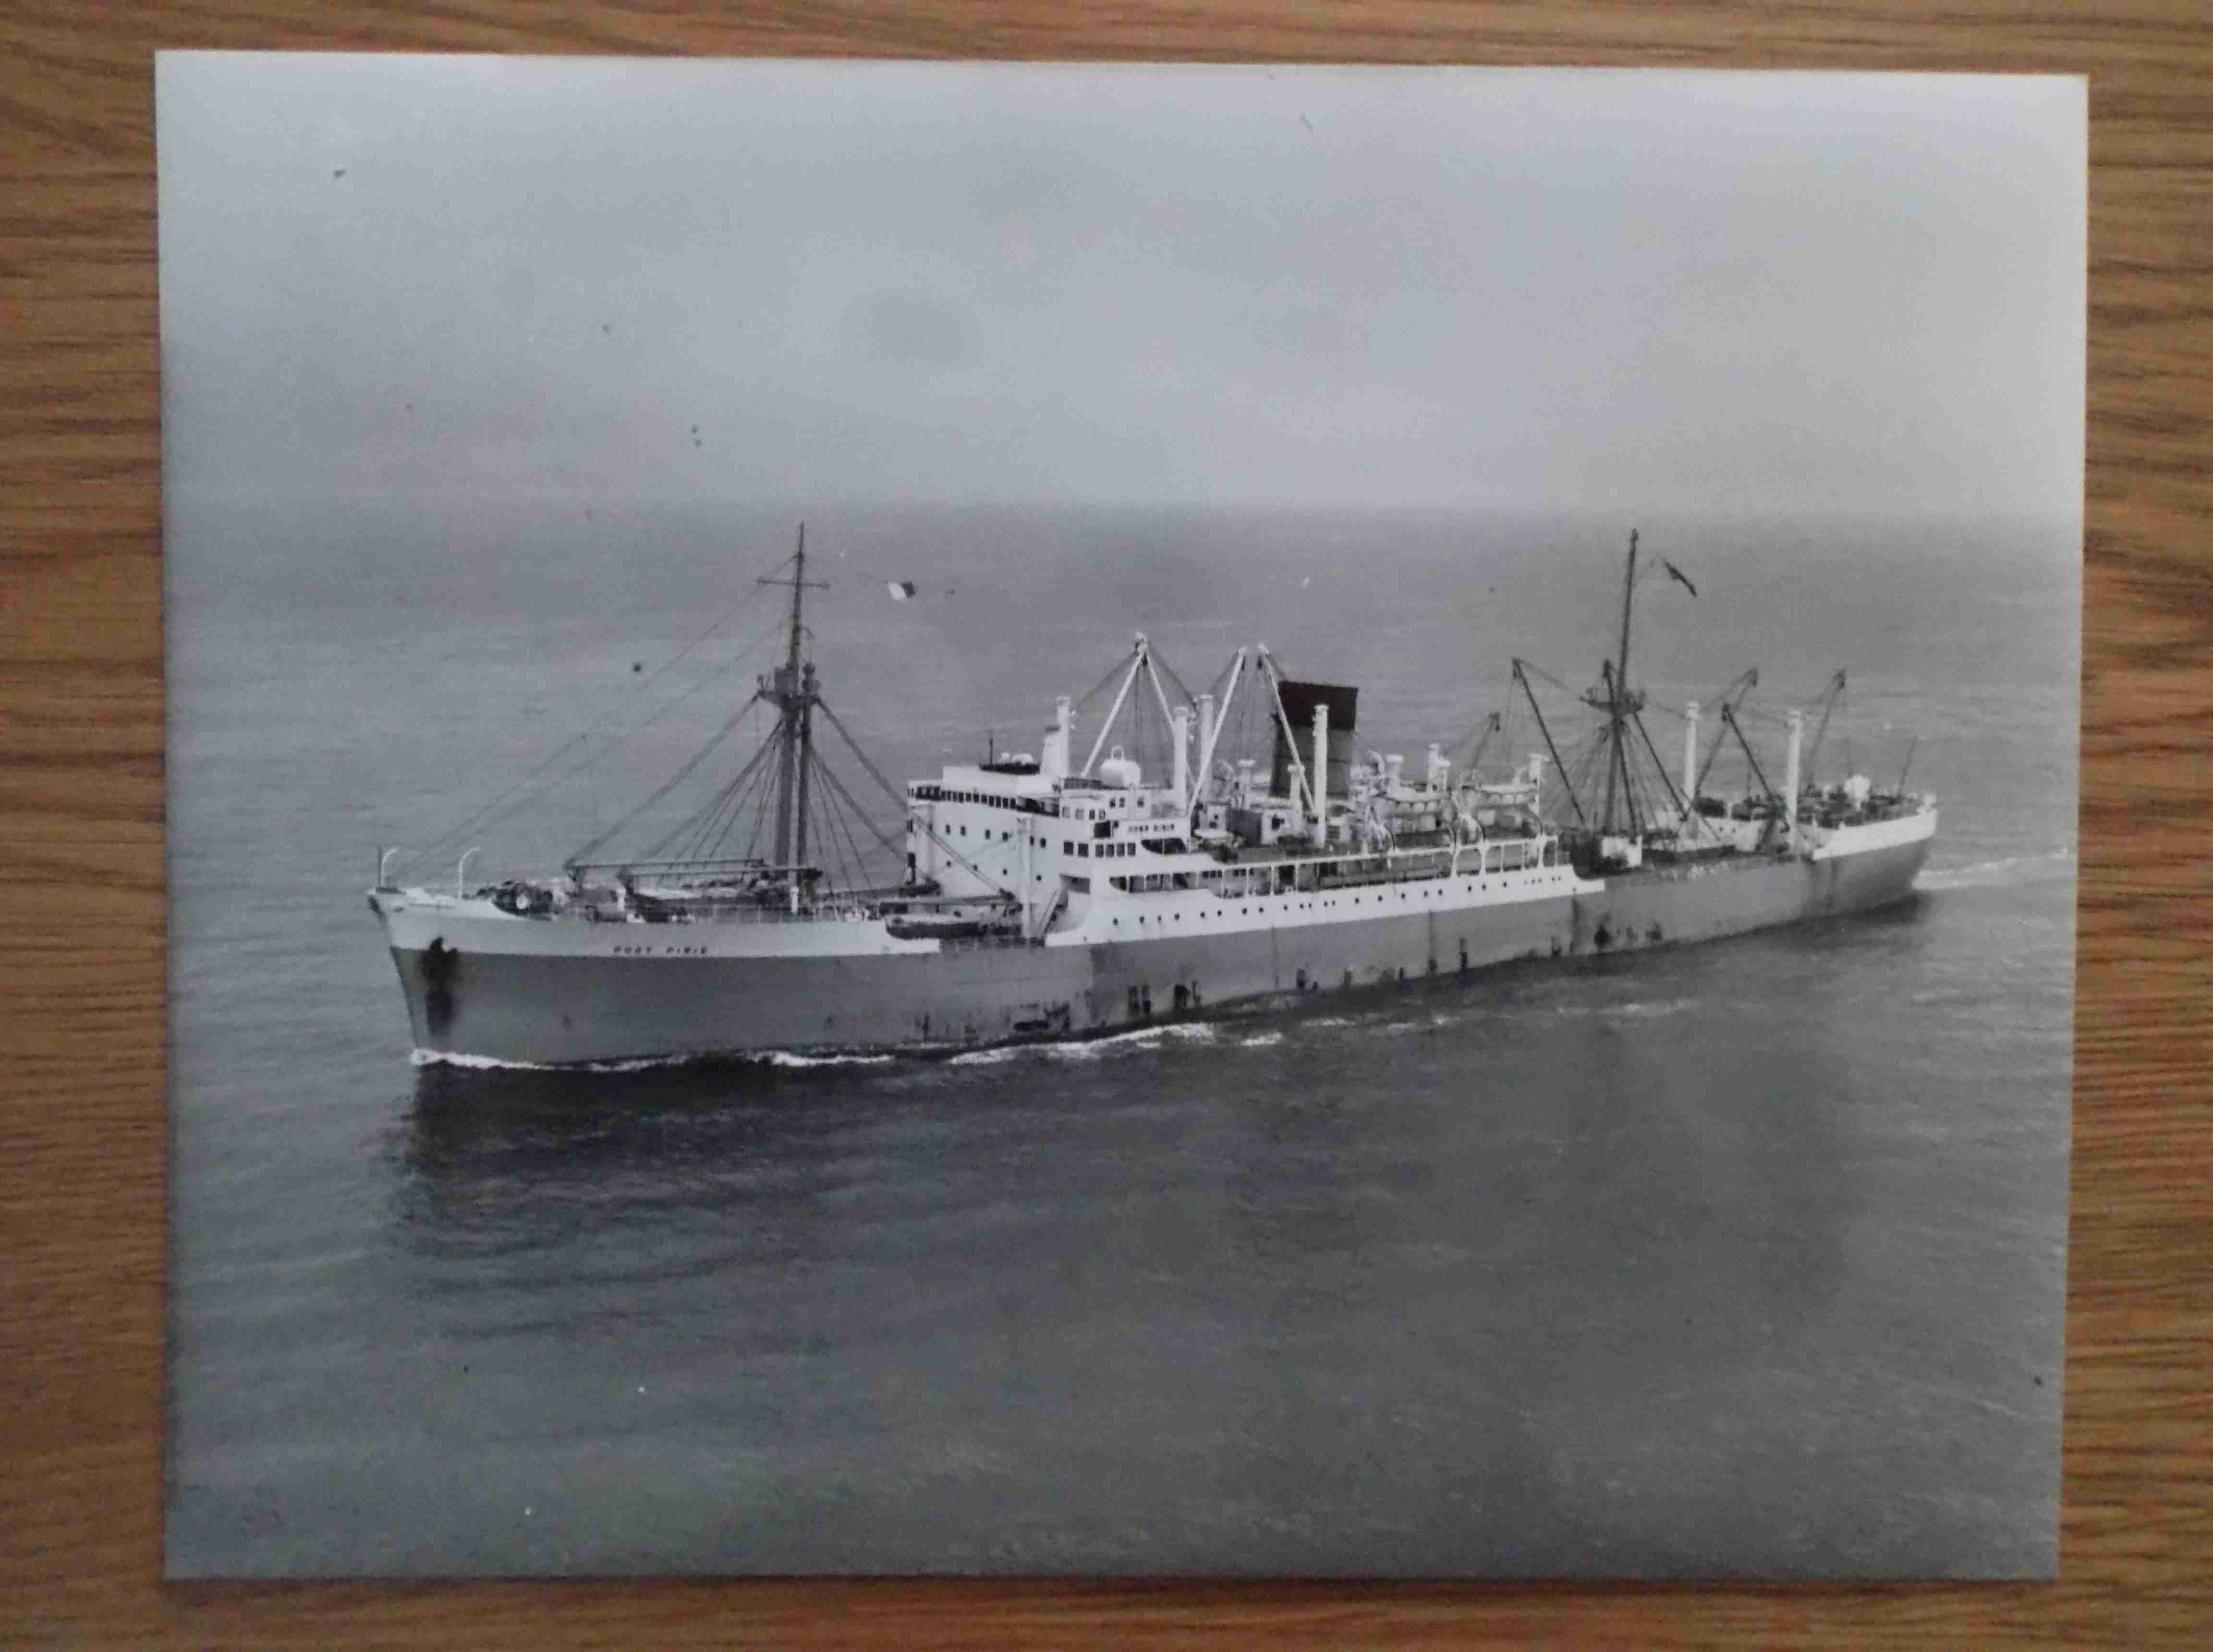 LARGE B/W PHOTOGRAPH OF THE PORT LINE VESSEL THE PORT PIRIE